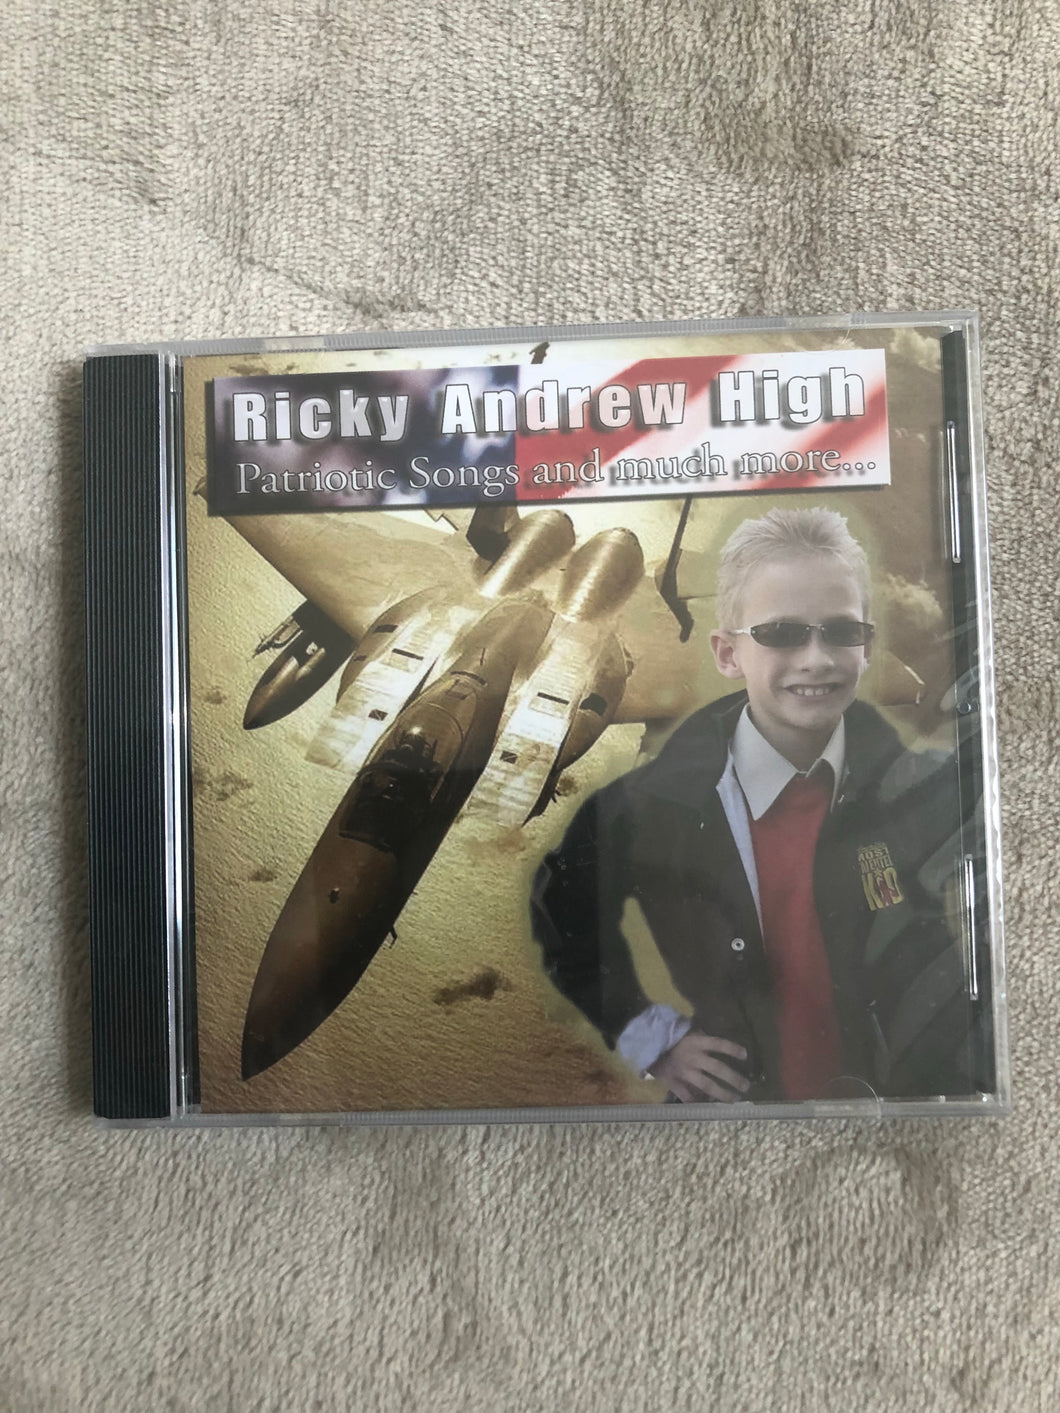 Ricky Andrew High Patriotic Songs and Much more